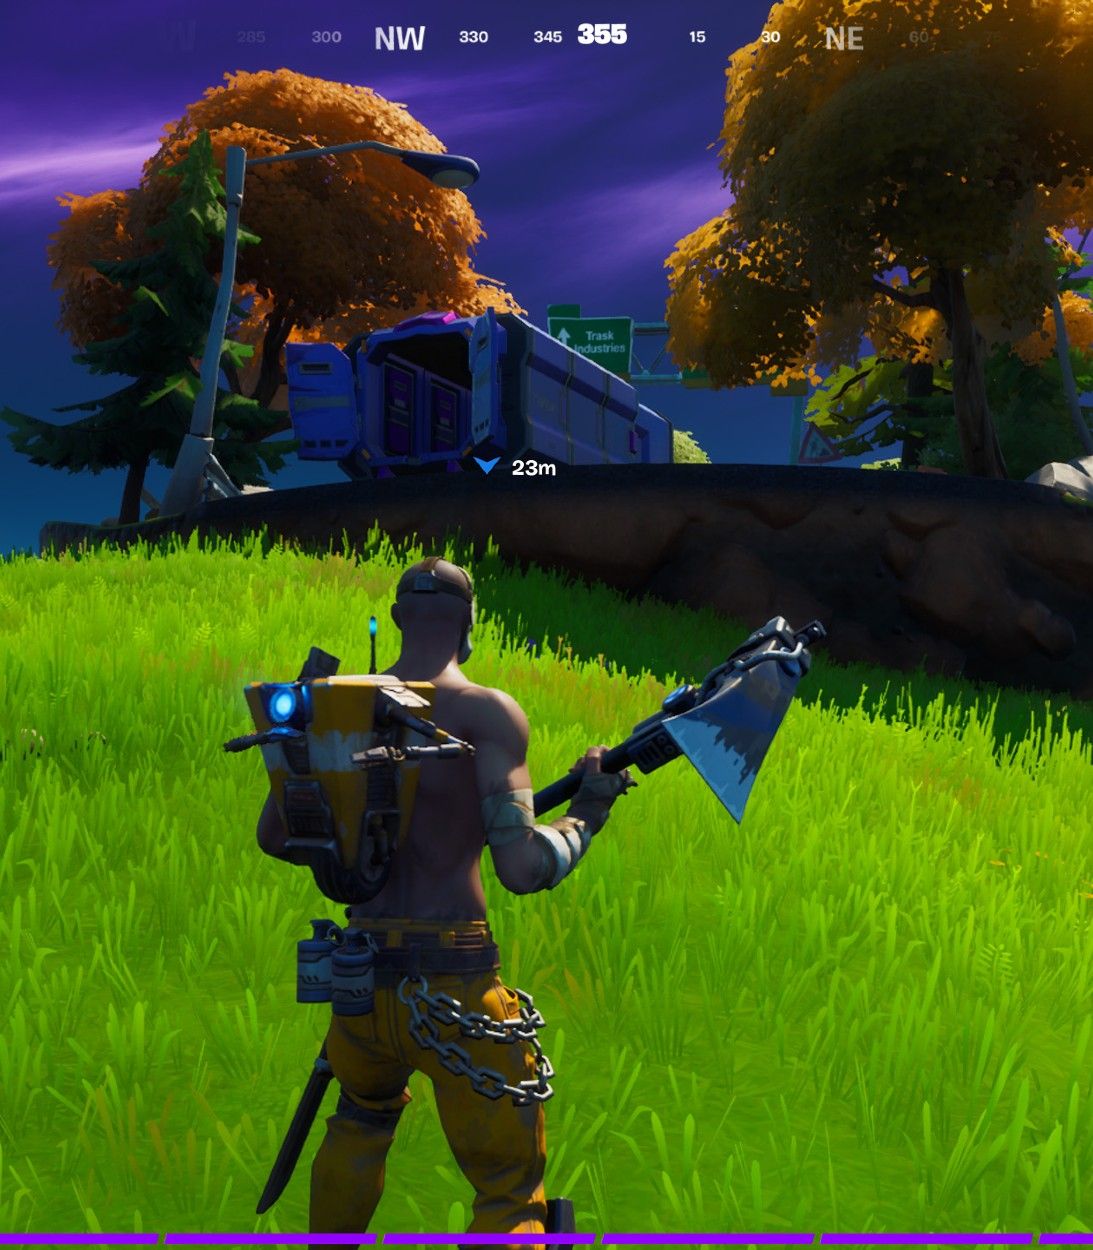 A player finds the Trask Transport Truck in Fortnite Season 4